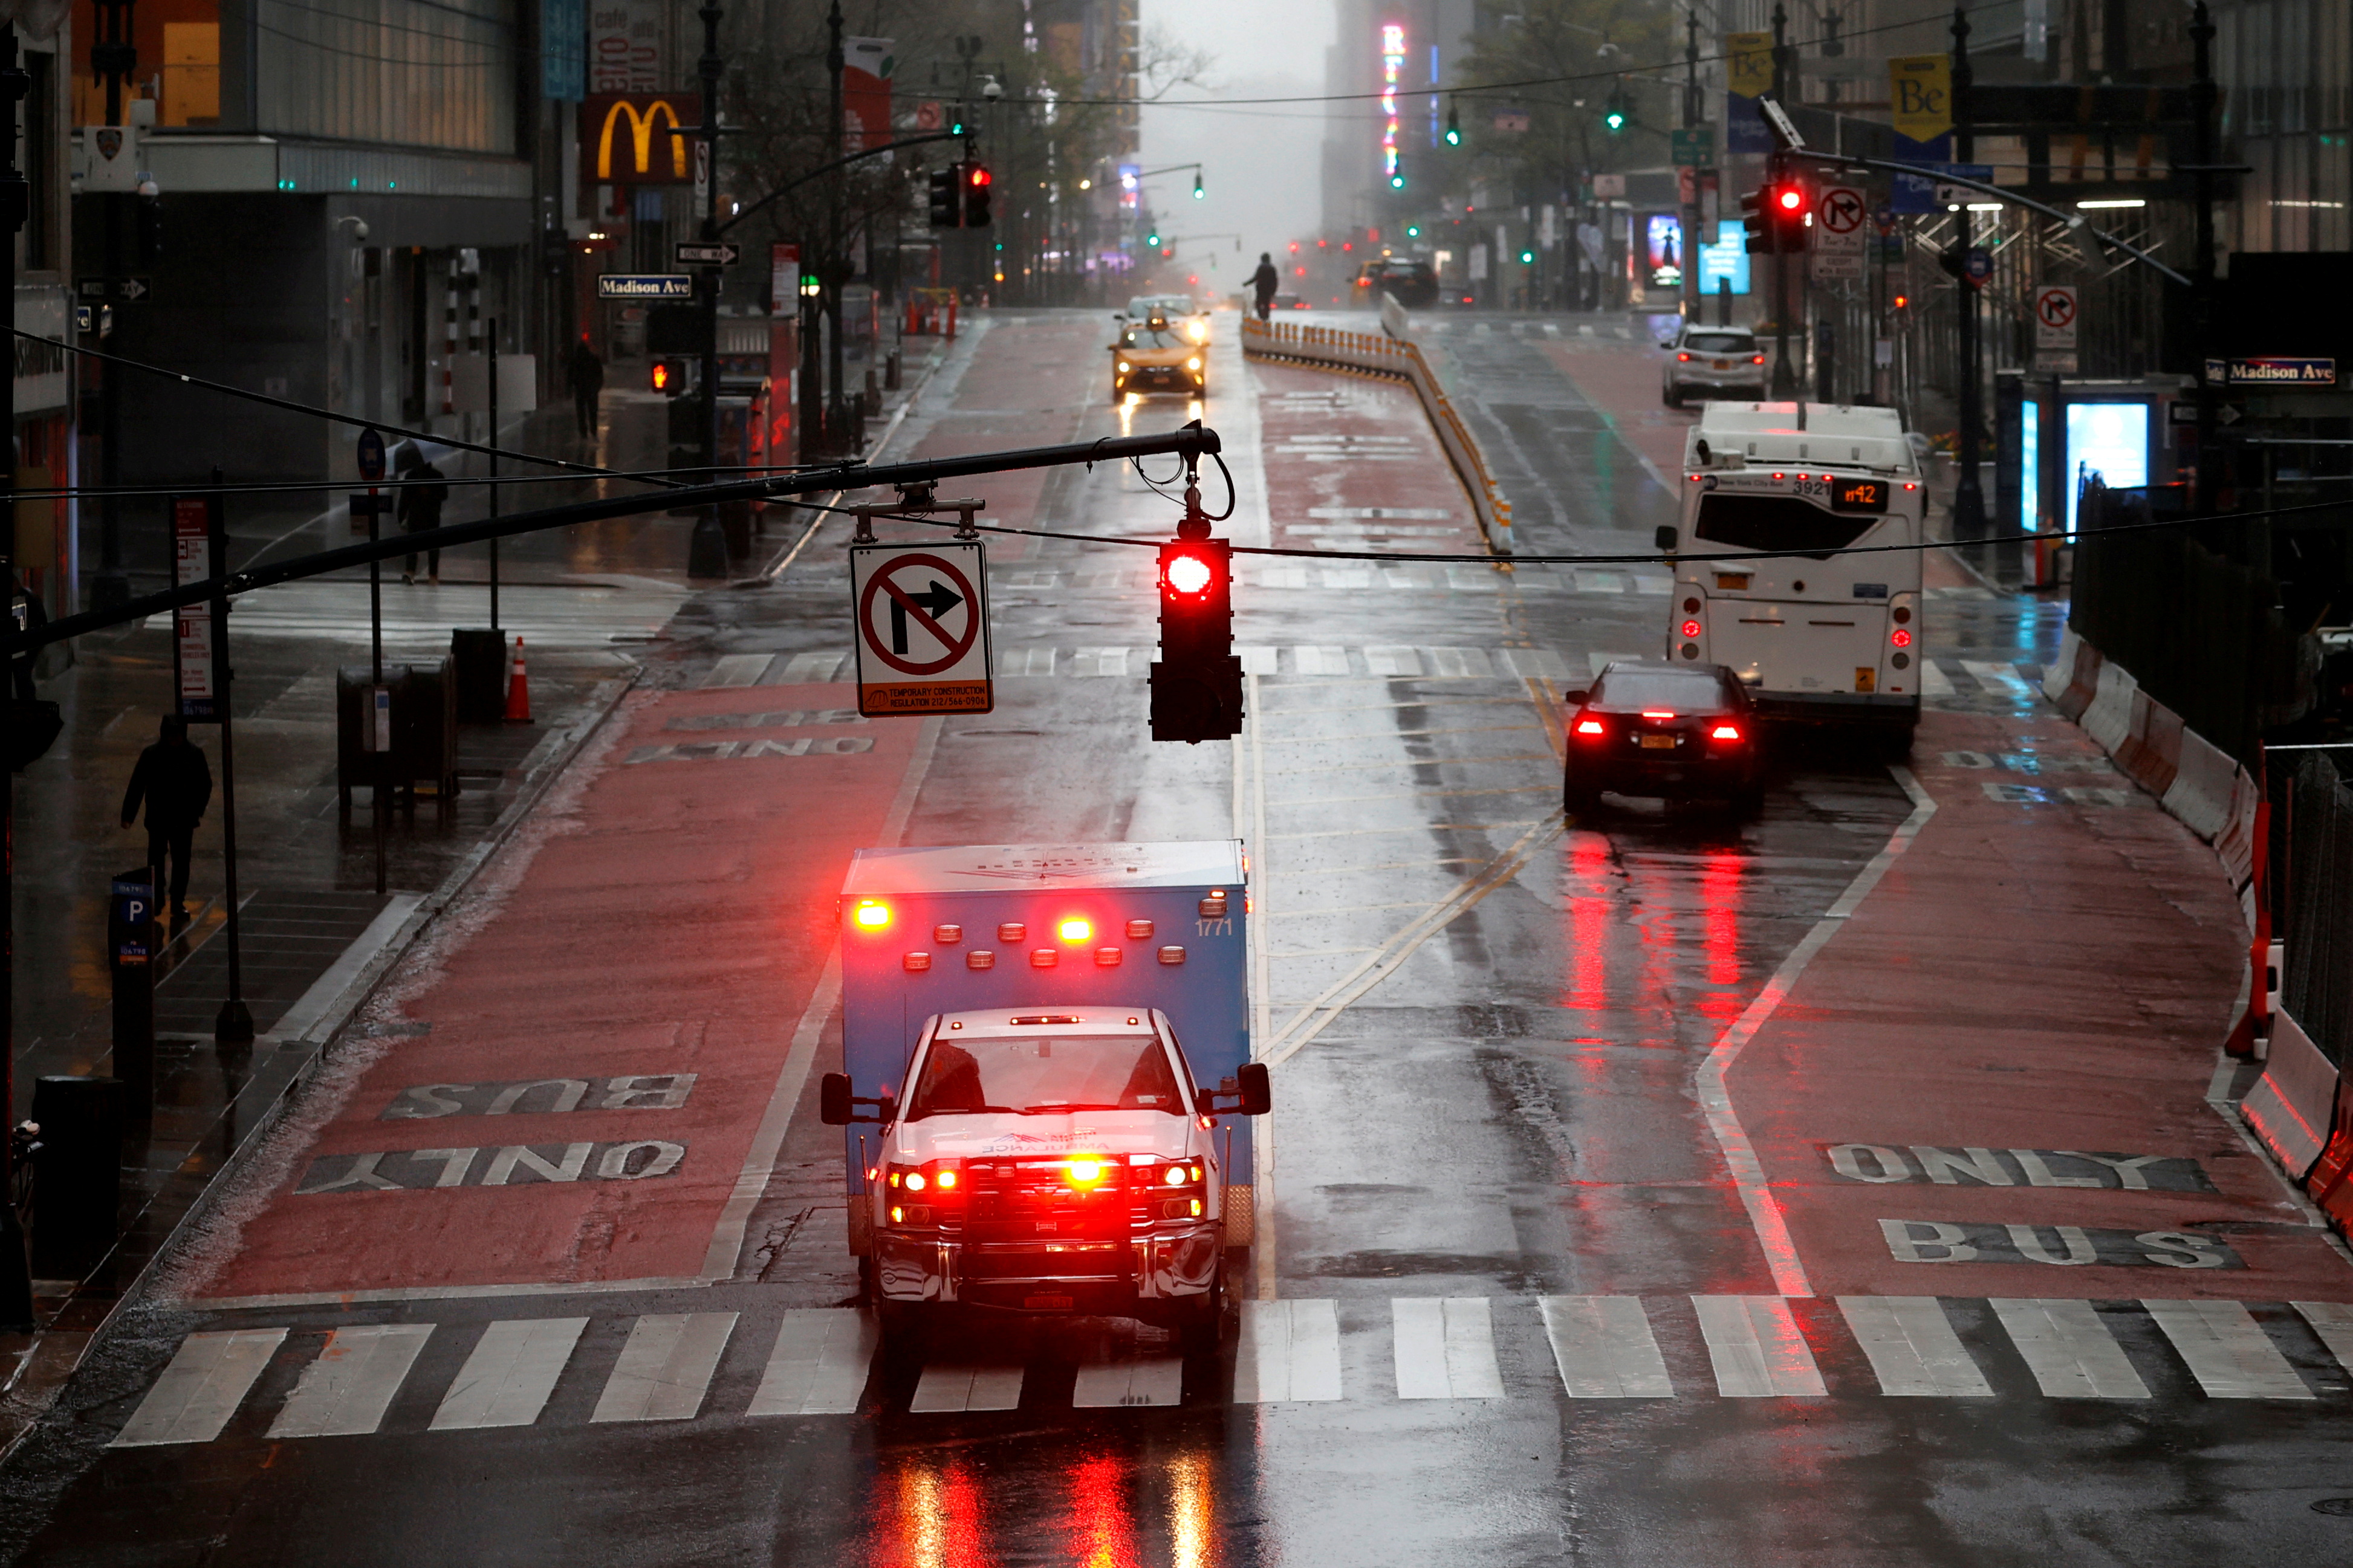 Ambulance in heavy rain and high winds across nearly empty East 42nd street during outbreak of coronavirus disease (COVID-19) in New York